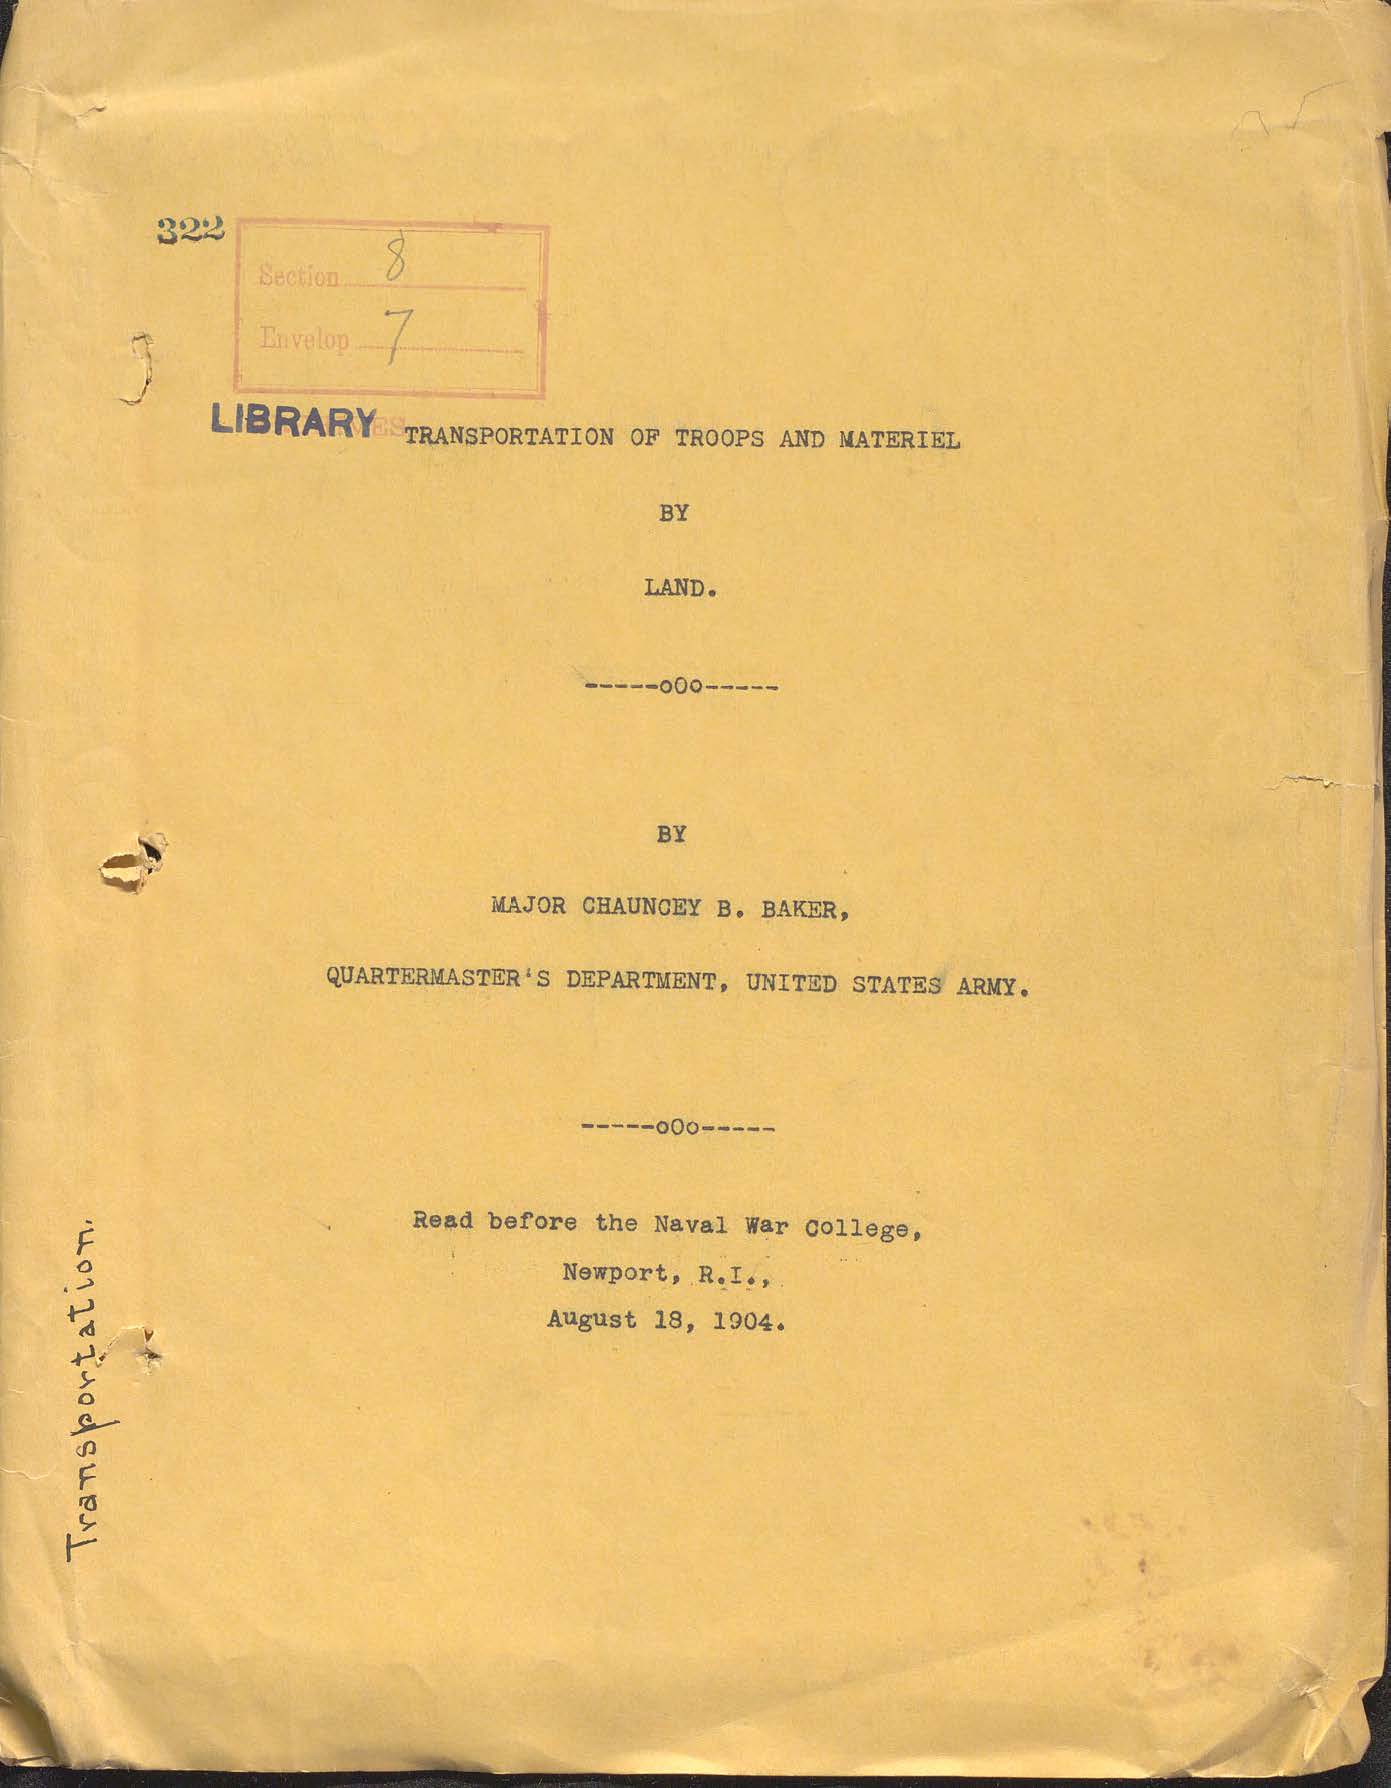 Transportation of Troops and Materials By Land, by Chauncey B. Baker